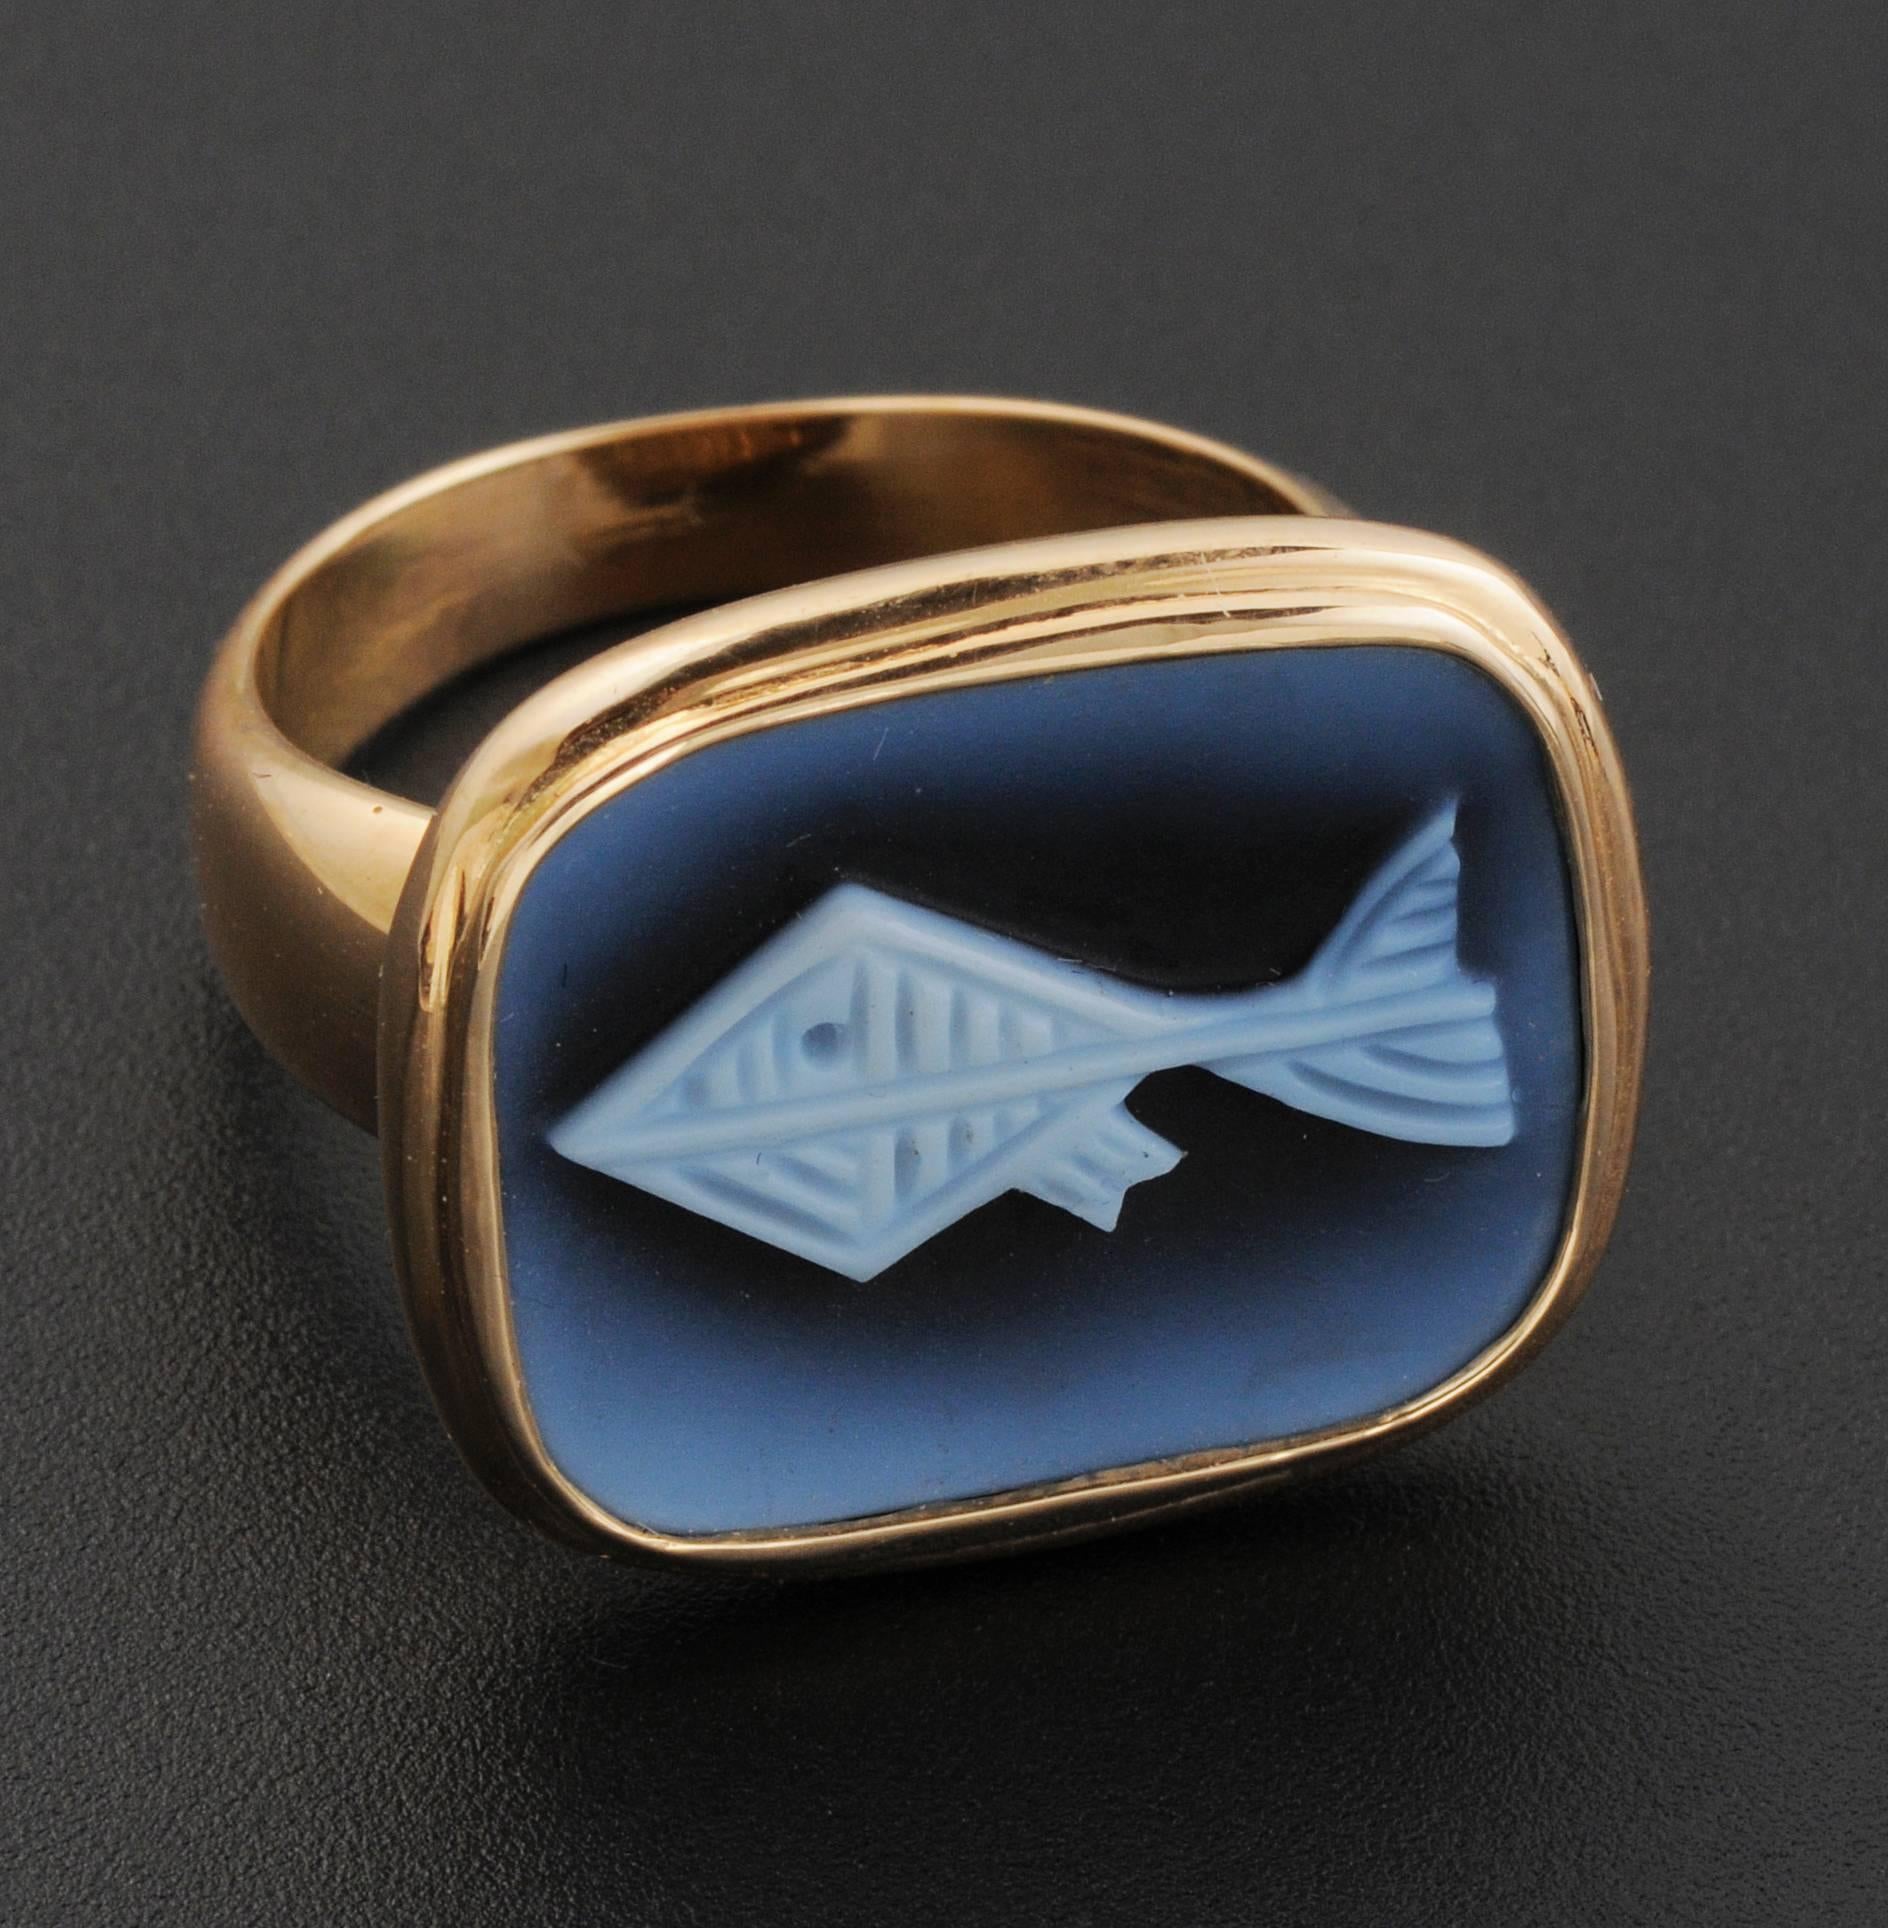 Rare 18K Gold and blue cameo ring by Georges Braque (1882-1963), inventor of cubism.

The piece is called Doris, after the Greek Nymph, mother of the Nereides.

